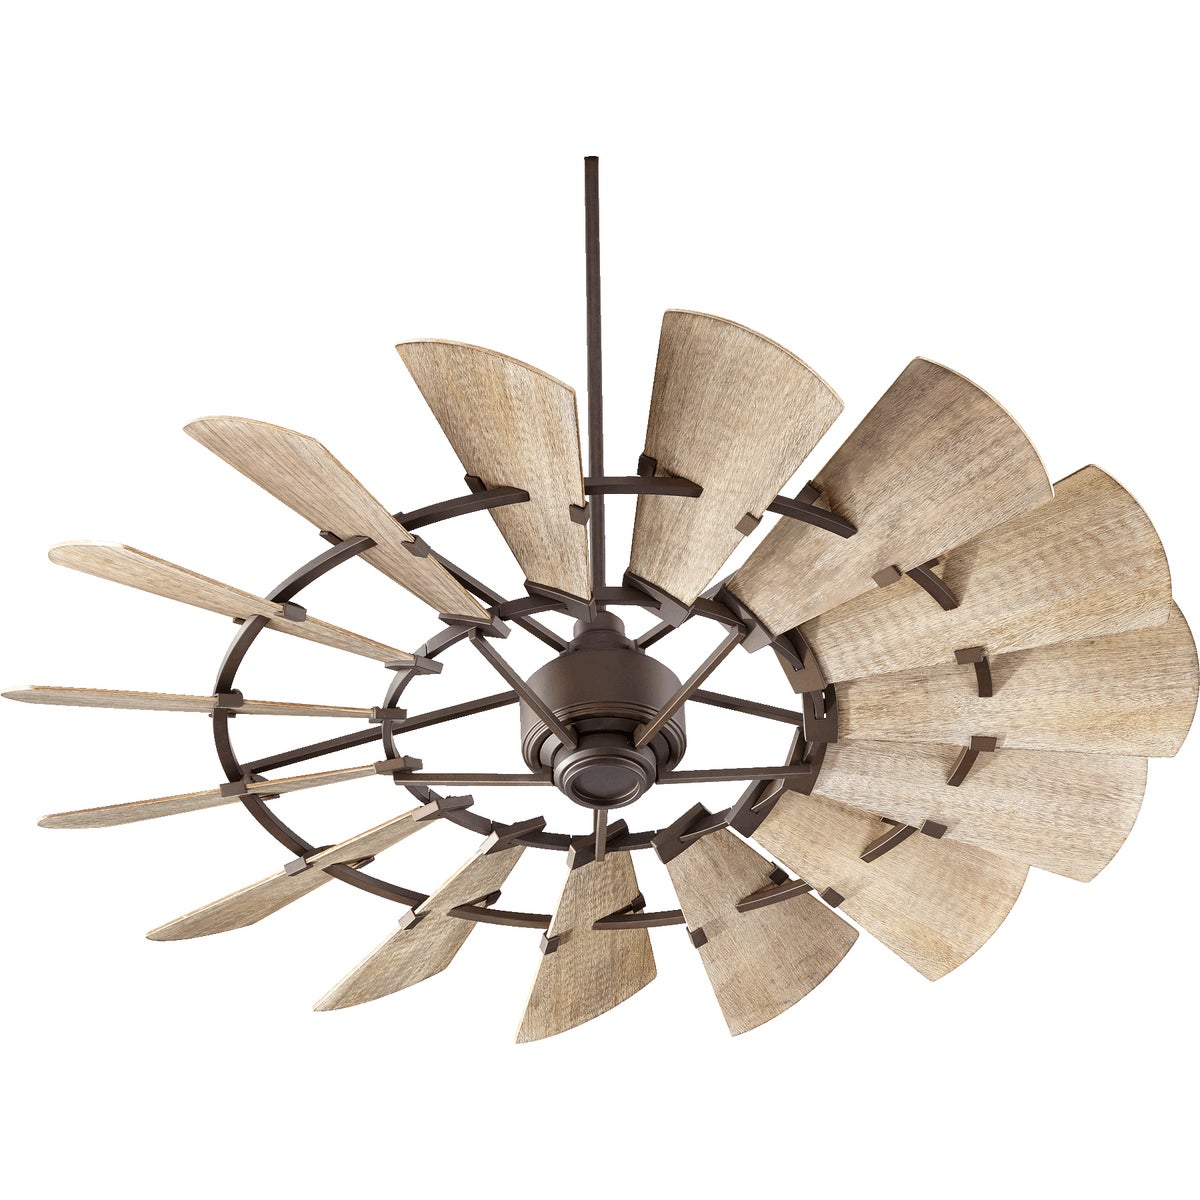 Windmill Ceiling Fan with 15 weathered oak wooden blades, rustic design. Quorum International DC-165L motor, UL Listed, Dry Location. 16.5"H x 60"W. Limited Lifetime Warranty.